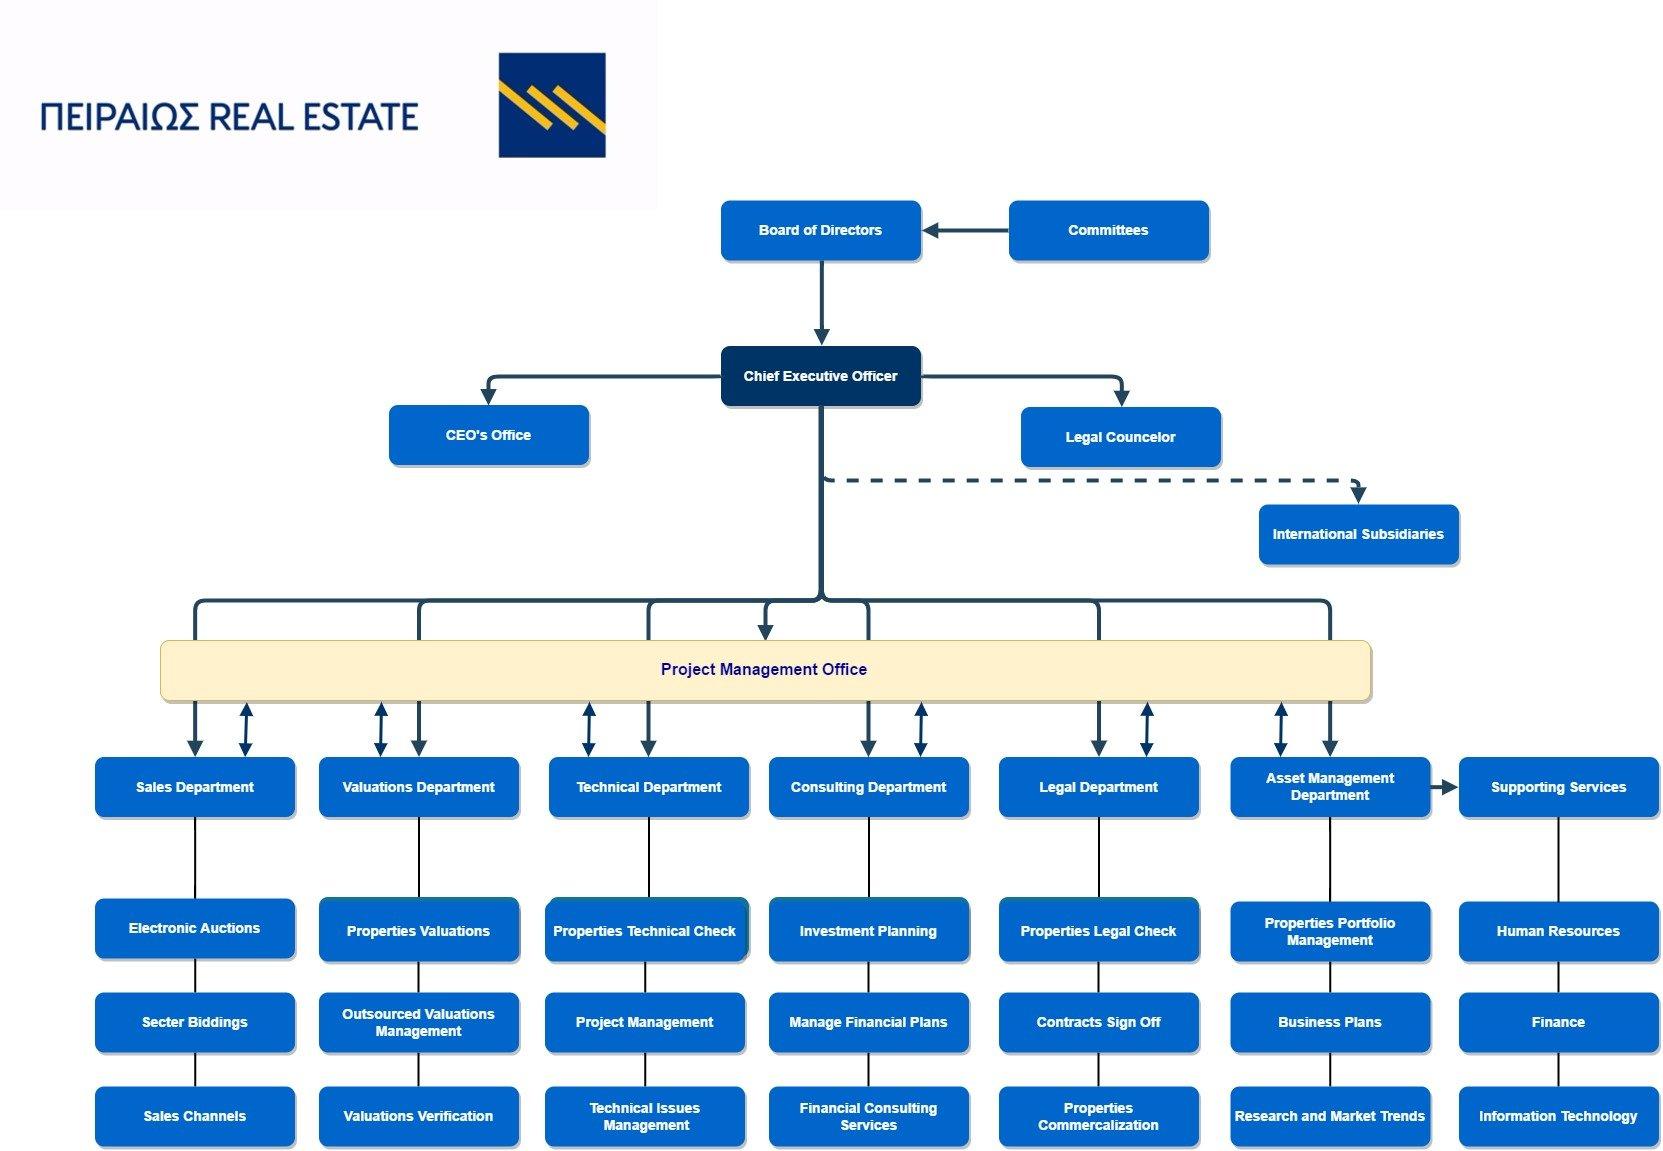 How is a real estate develpment company structured